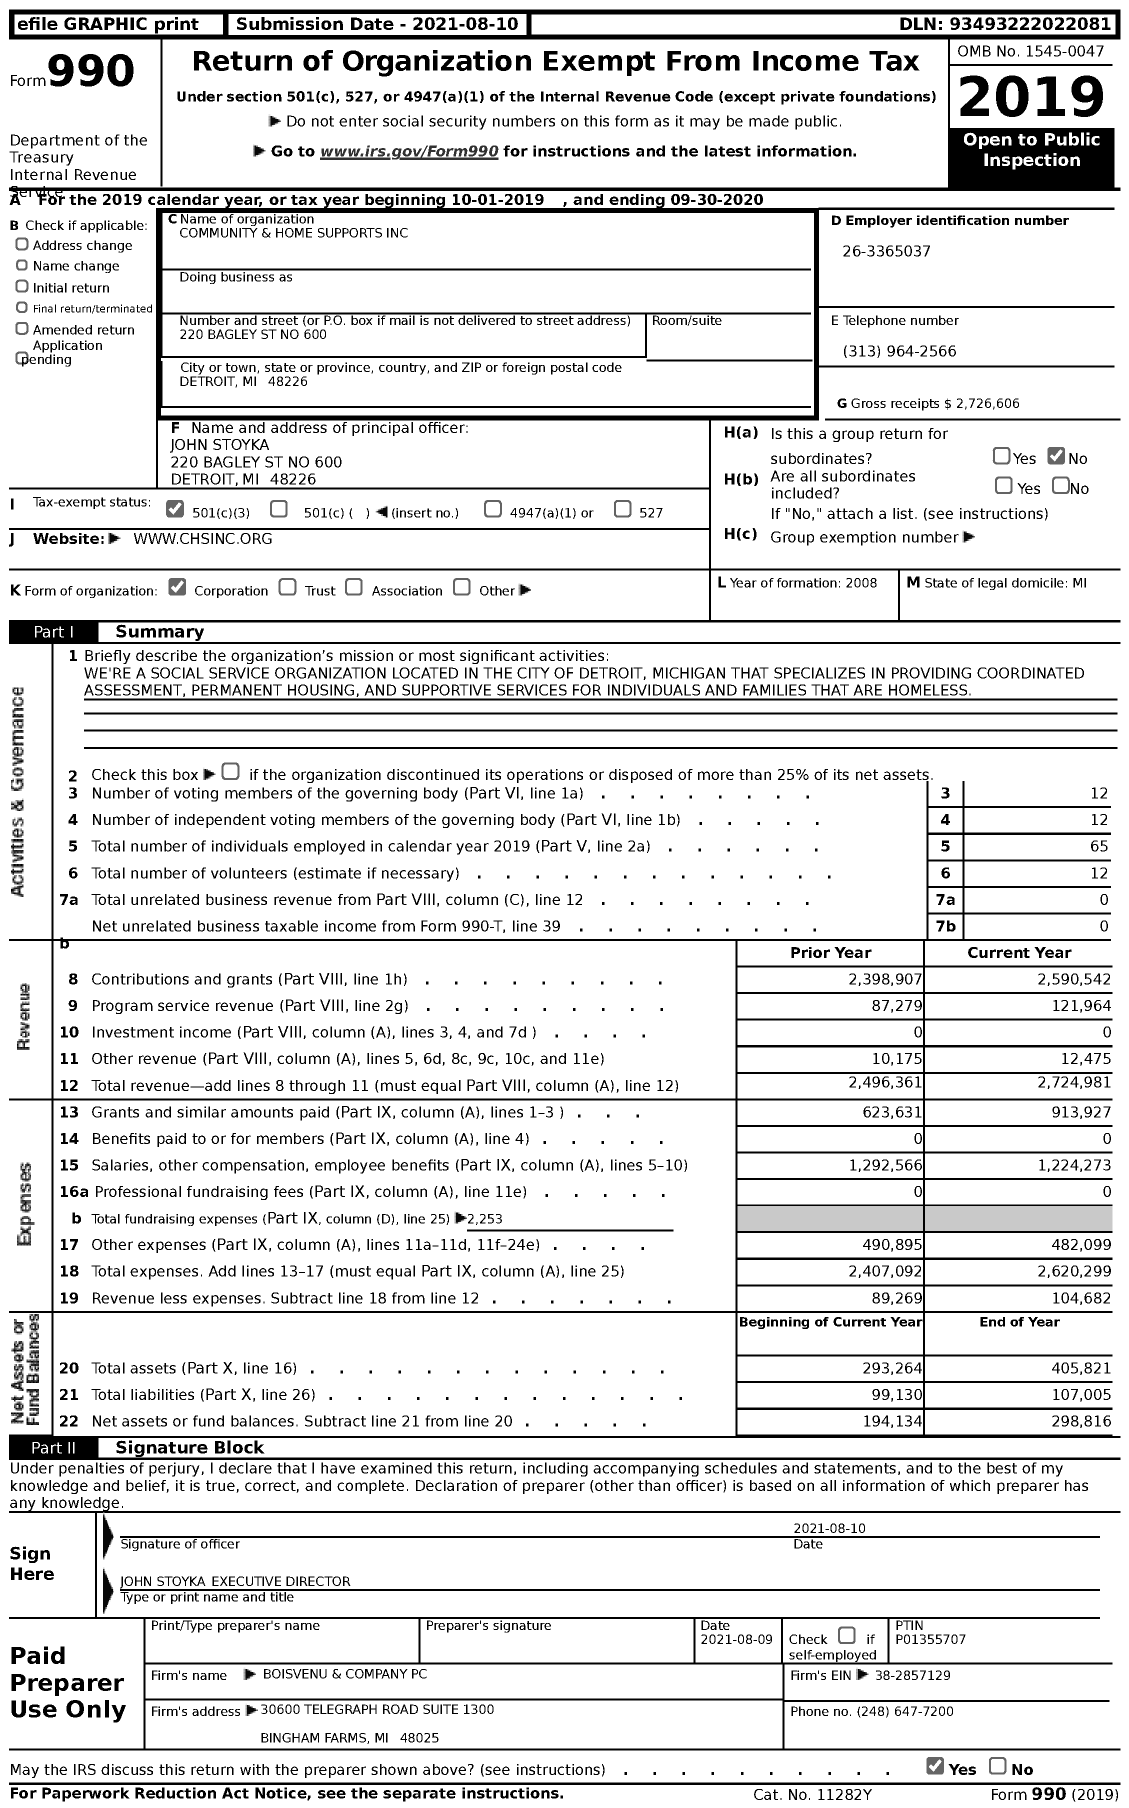 Image of first page of 2019 Form 990 for Community and Home Supports